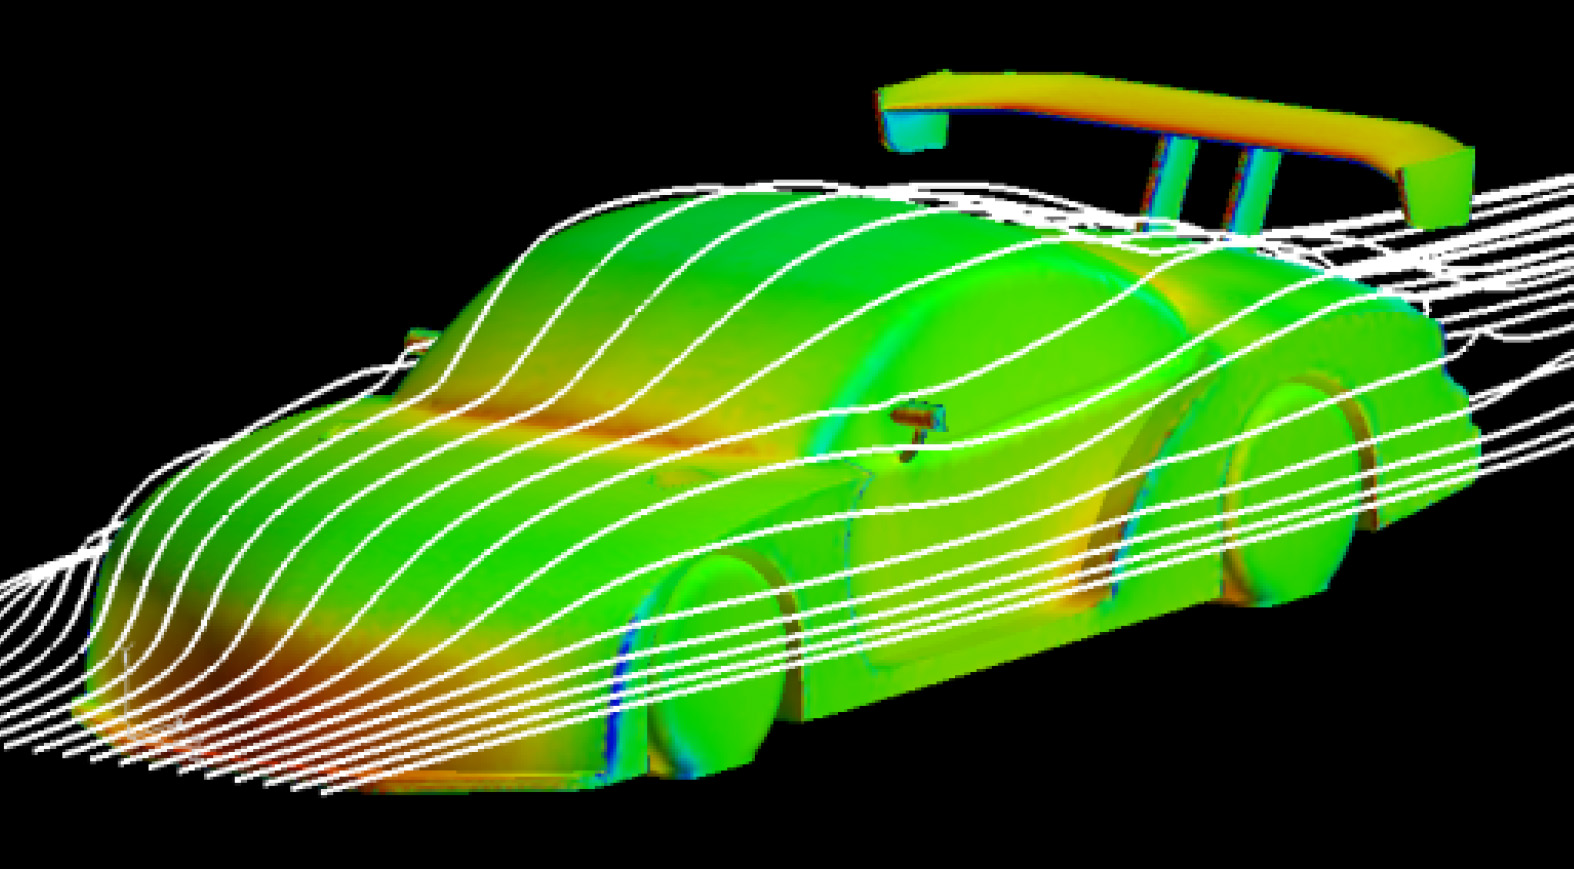 Investigation of Flow Phenomena and Application to Car Technology